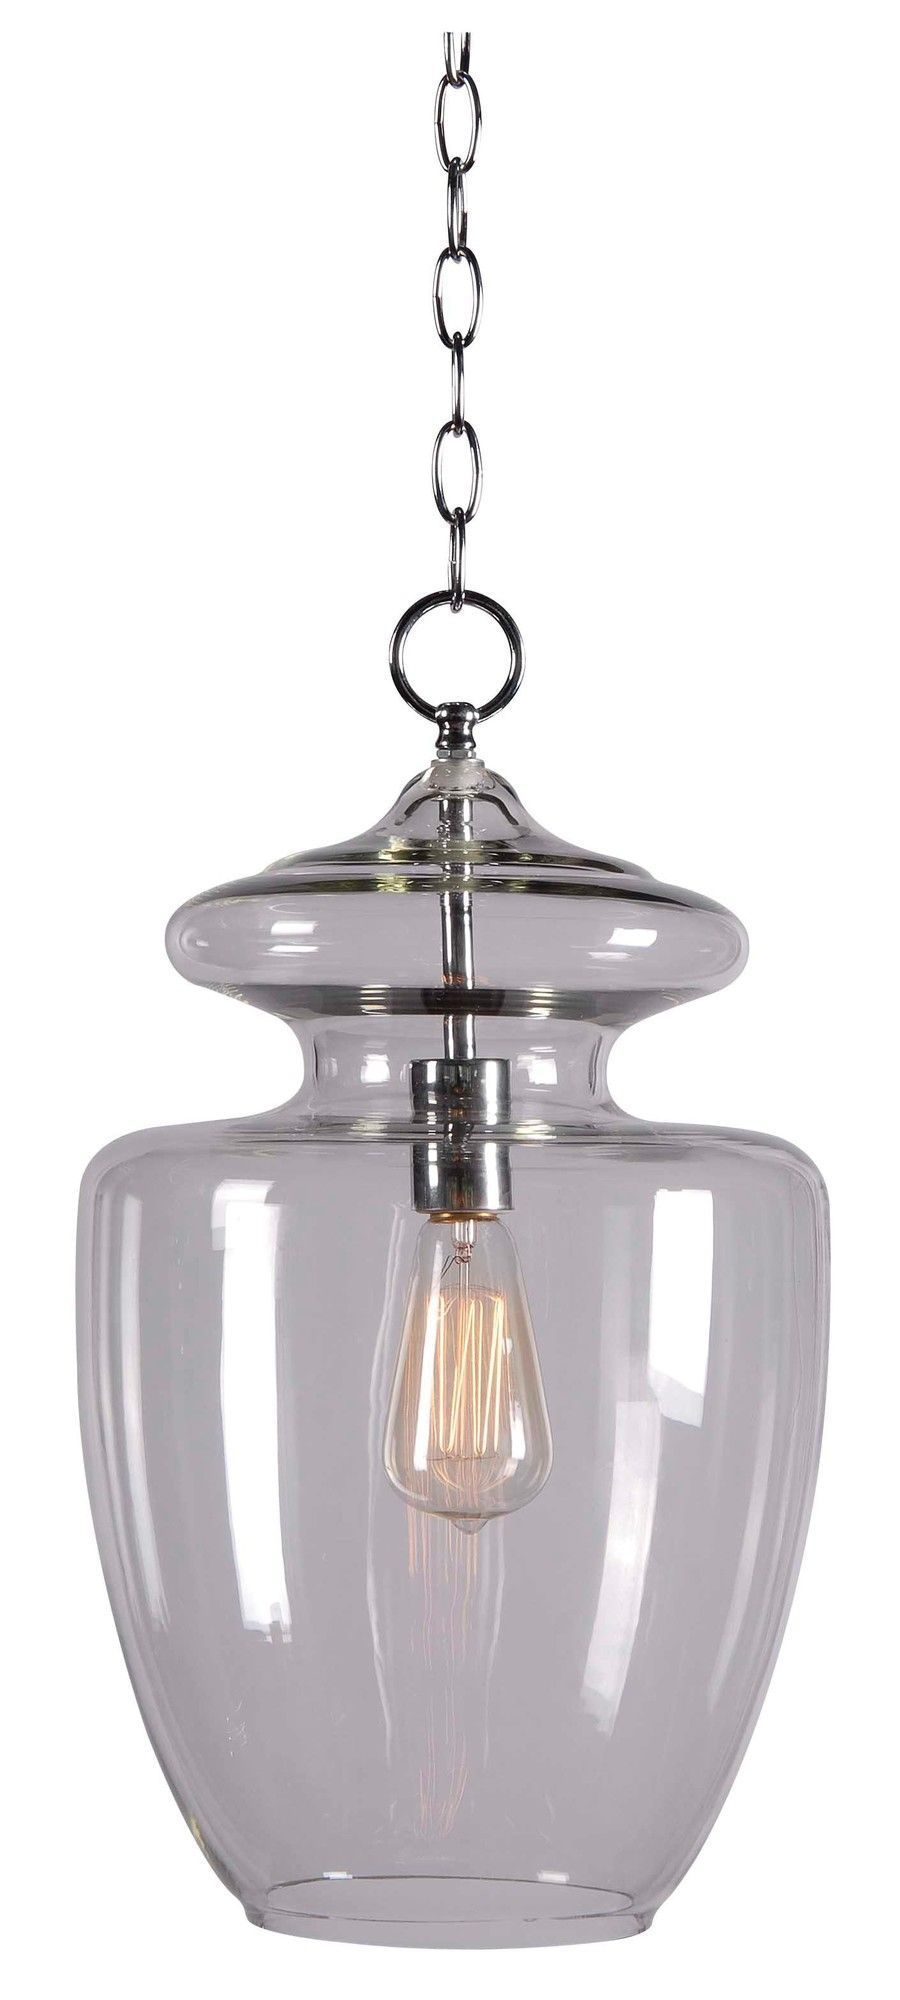 Sussex 1 Light Single Geometric Pendant | Want | Pendant Pertaining To Sussex 1 Light Single Geometric Pendants (View 4 of 30)